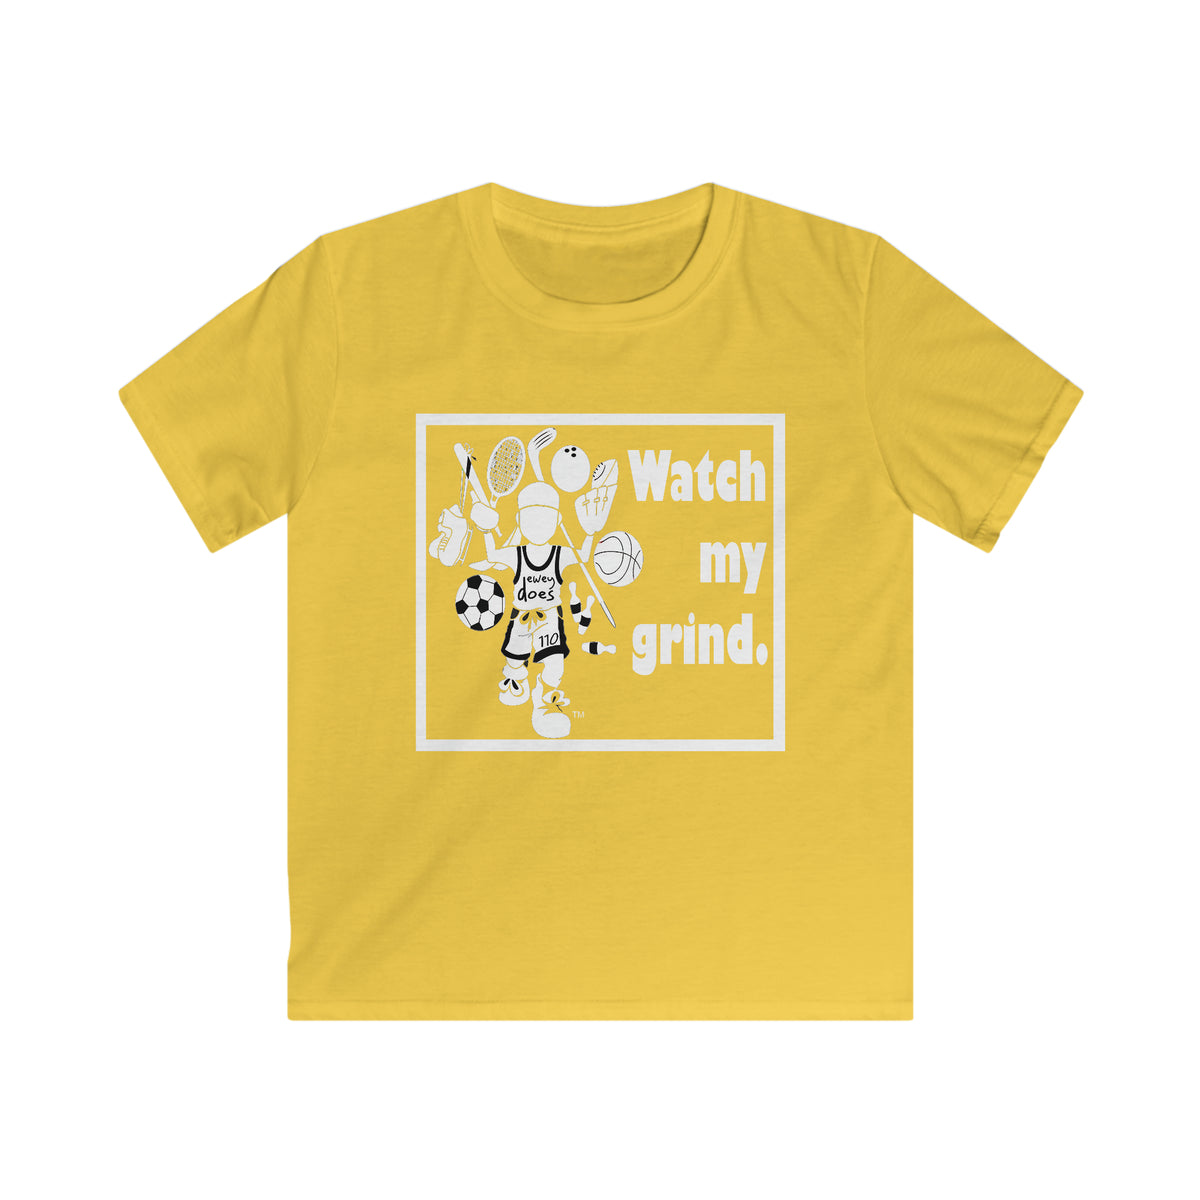 Custom Graphic Tees | White Graphic T-Shirt | Dewey Does Novelty Tees